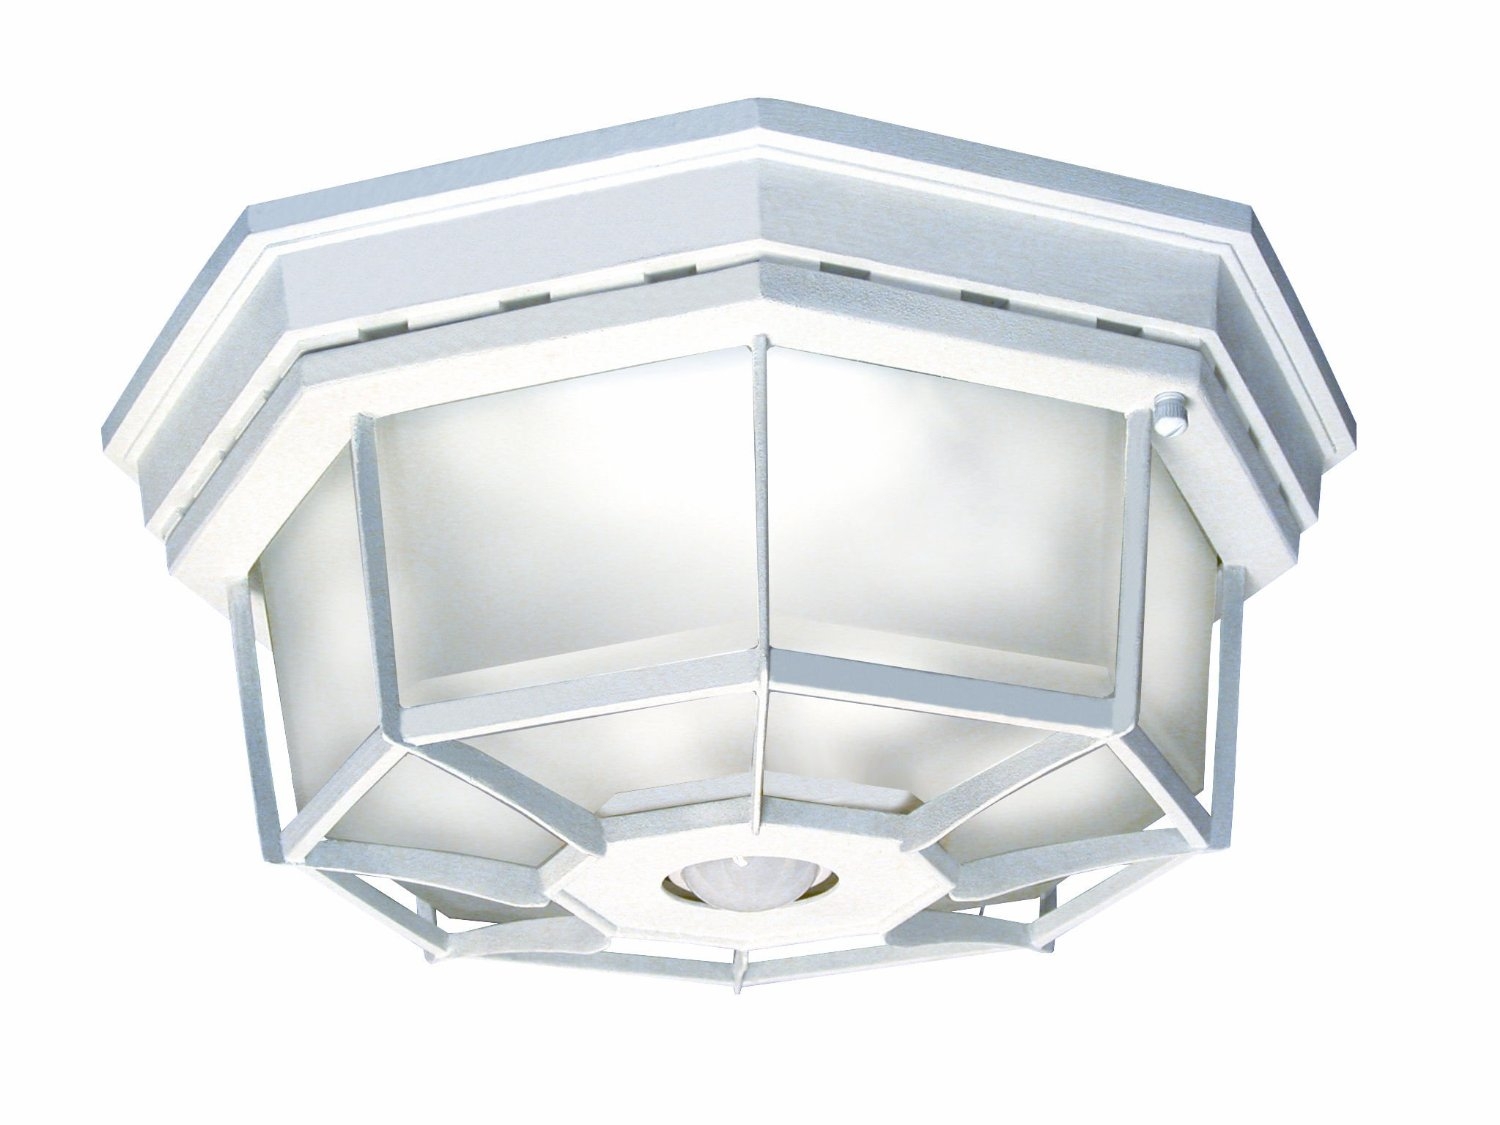 Motion Activated Indoor Ceiling Light Fixture